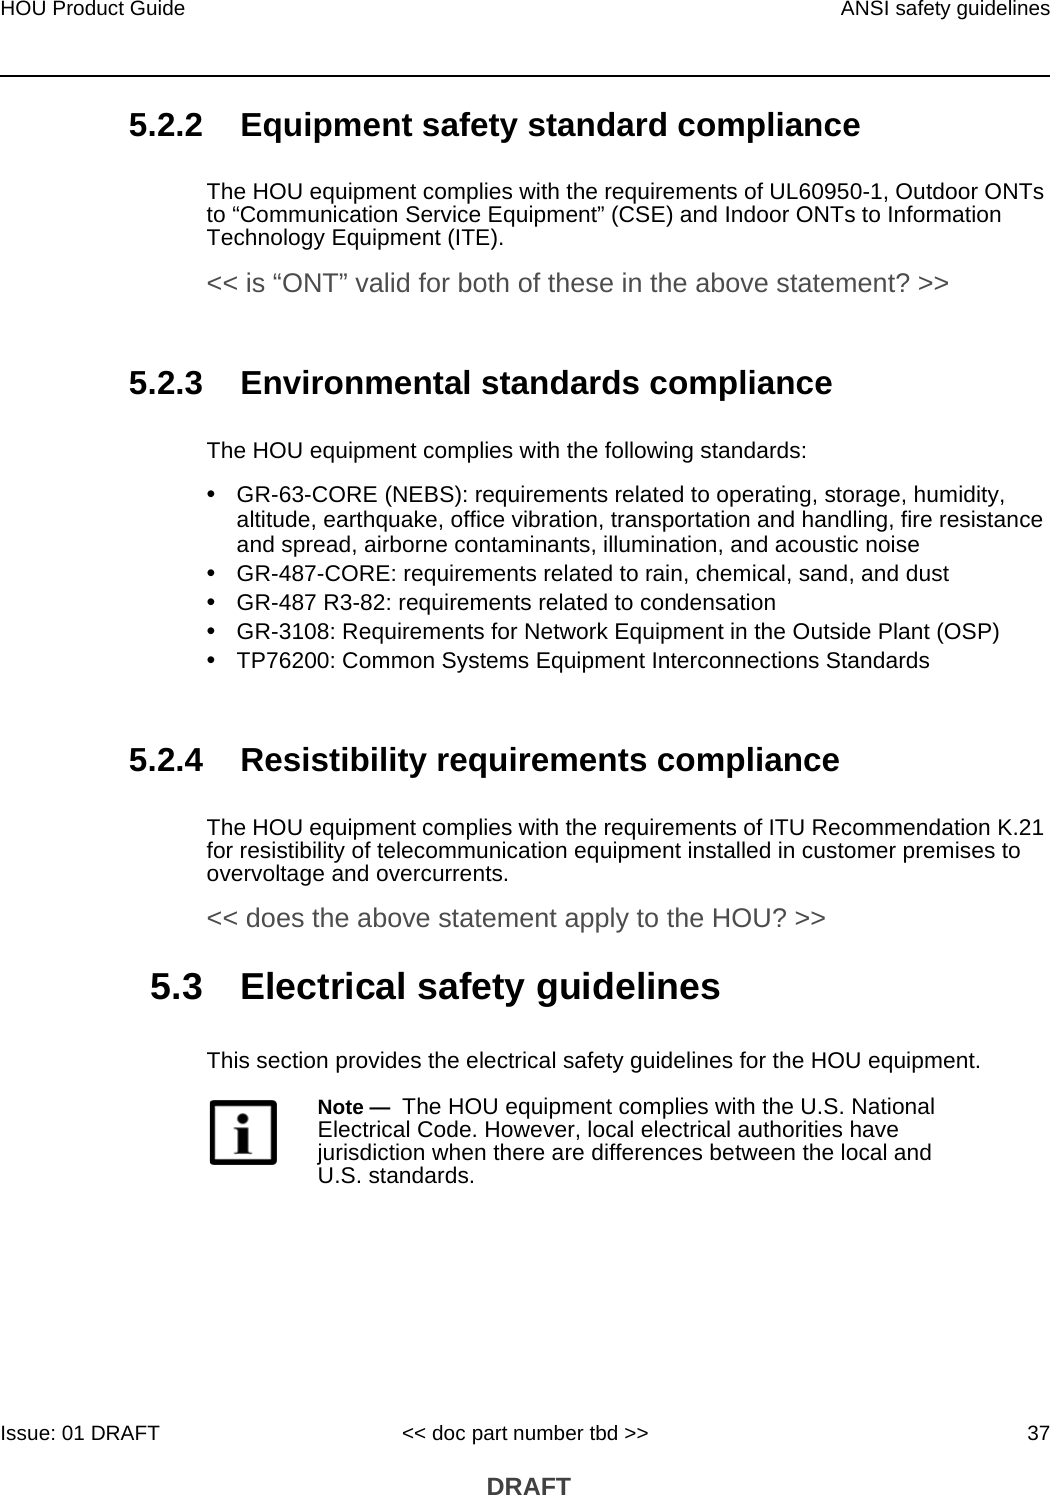 HOU Product Guide ANSI safety guidelinesIssue: 01 DRAFT &lt;&lt; doc part number tbd &gt;&gt; 37 DRAFT5.2.2 Equipment safety standard complianceThe HOU equipment complies with the requirements of UL60950-1, Outdoor ONTs to “Communication Service Equipment” (CSE) and Indoor ONTs to Information Technology Equipment (ITE). &lt;&lt; is “ONT” valid for both of these in the above statement? &gt;&gt;5.2.3 Environmental standards complianceThe HOU equipment complies with the following standards:•GR-63-CORE (NEBS): requirements related to operating, storage, humidity, altitude, earthquake, office vibration, transportation and handling, fire resistance and spread, airborne contaminants, illumination, and acoustic noise•GR-487-CORE: requirements related to rain, chemical, sand, and dust•GR-487 R3-82: requirements related to condensation •GR-3108: Requirements for Network Equipment in the Outside Plant (OSP)•TP76200: Common Systems Equipment Interconnections Standards5.2.4 Resistibility requirements complianceThe HOU equipment complies with the requirements of ITU Recommendation K.21 for resistibility of telecommunication equipment installed in customer premises to overvoltage and overcurrents. &lt;&lt; does the above statement apply to the HOU? &gt;&gt;5.3 Electrical safety guidelinesThis section provides the electrical safety guidelines for the HOU equipment.Note —  The HOU equipment complies with the U.S. National Electrical Code. However, local electrical authorities have jurisdiction when there are differences between the local and U.S. standards.